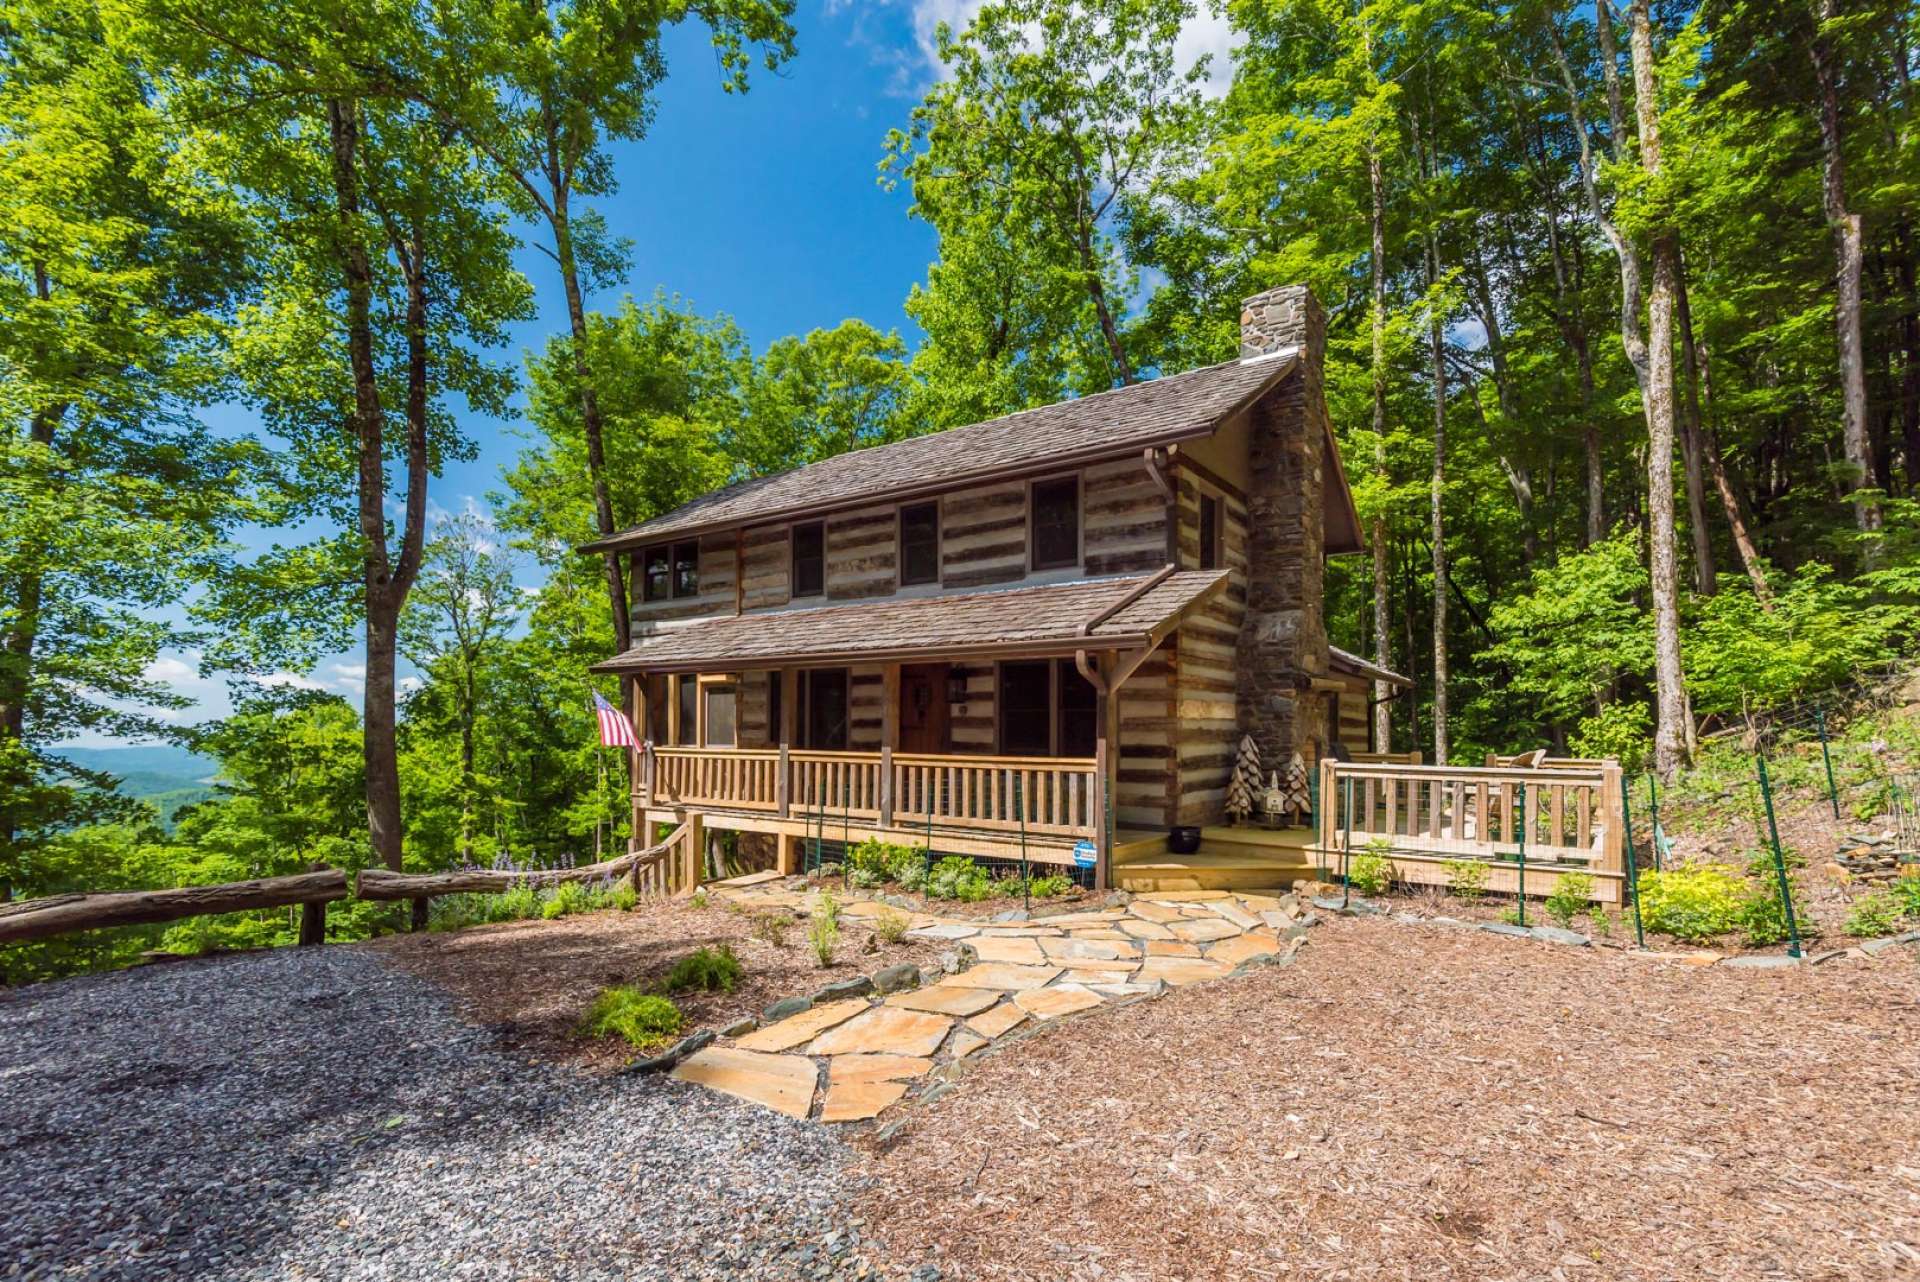 This Stonebridge log cabin estate is located off of Bear Park Drive, Todd area of Southern Ashe County in the NC Mountains.  Ask for more information on listing K153.